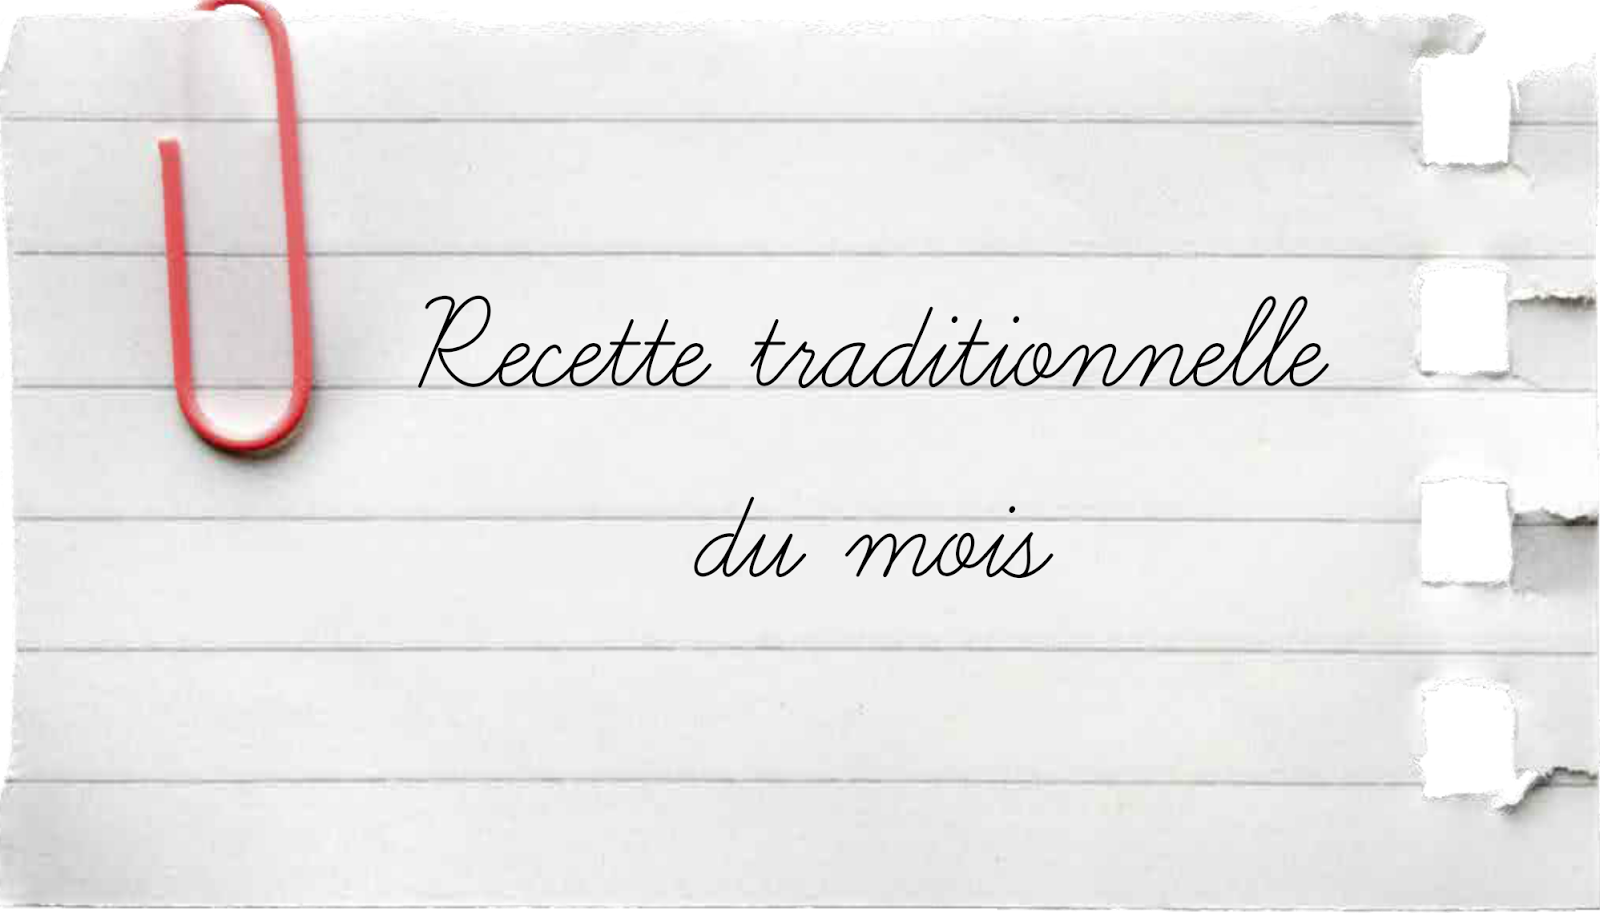 Recette tradition